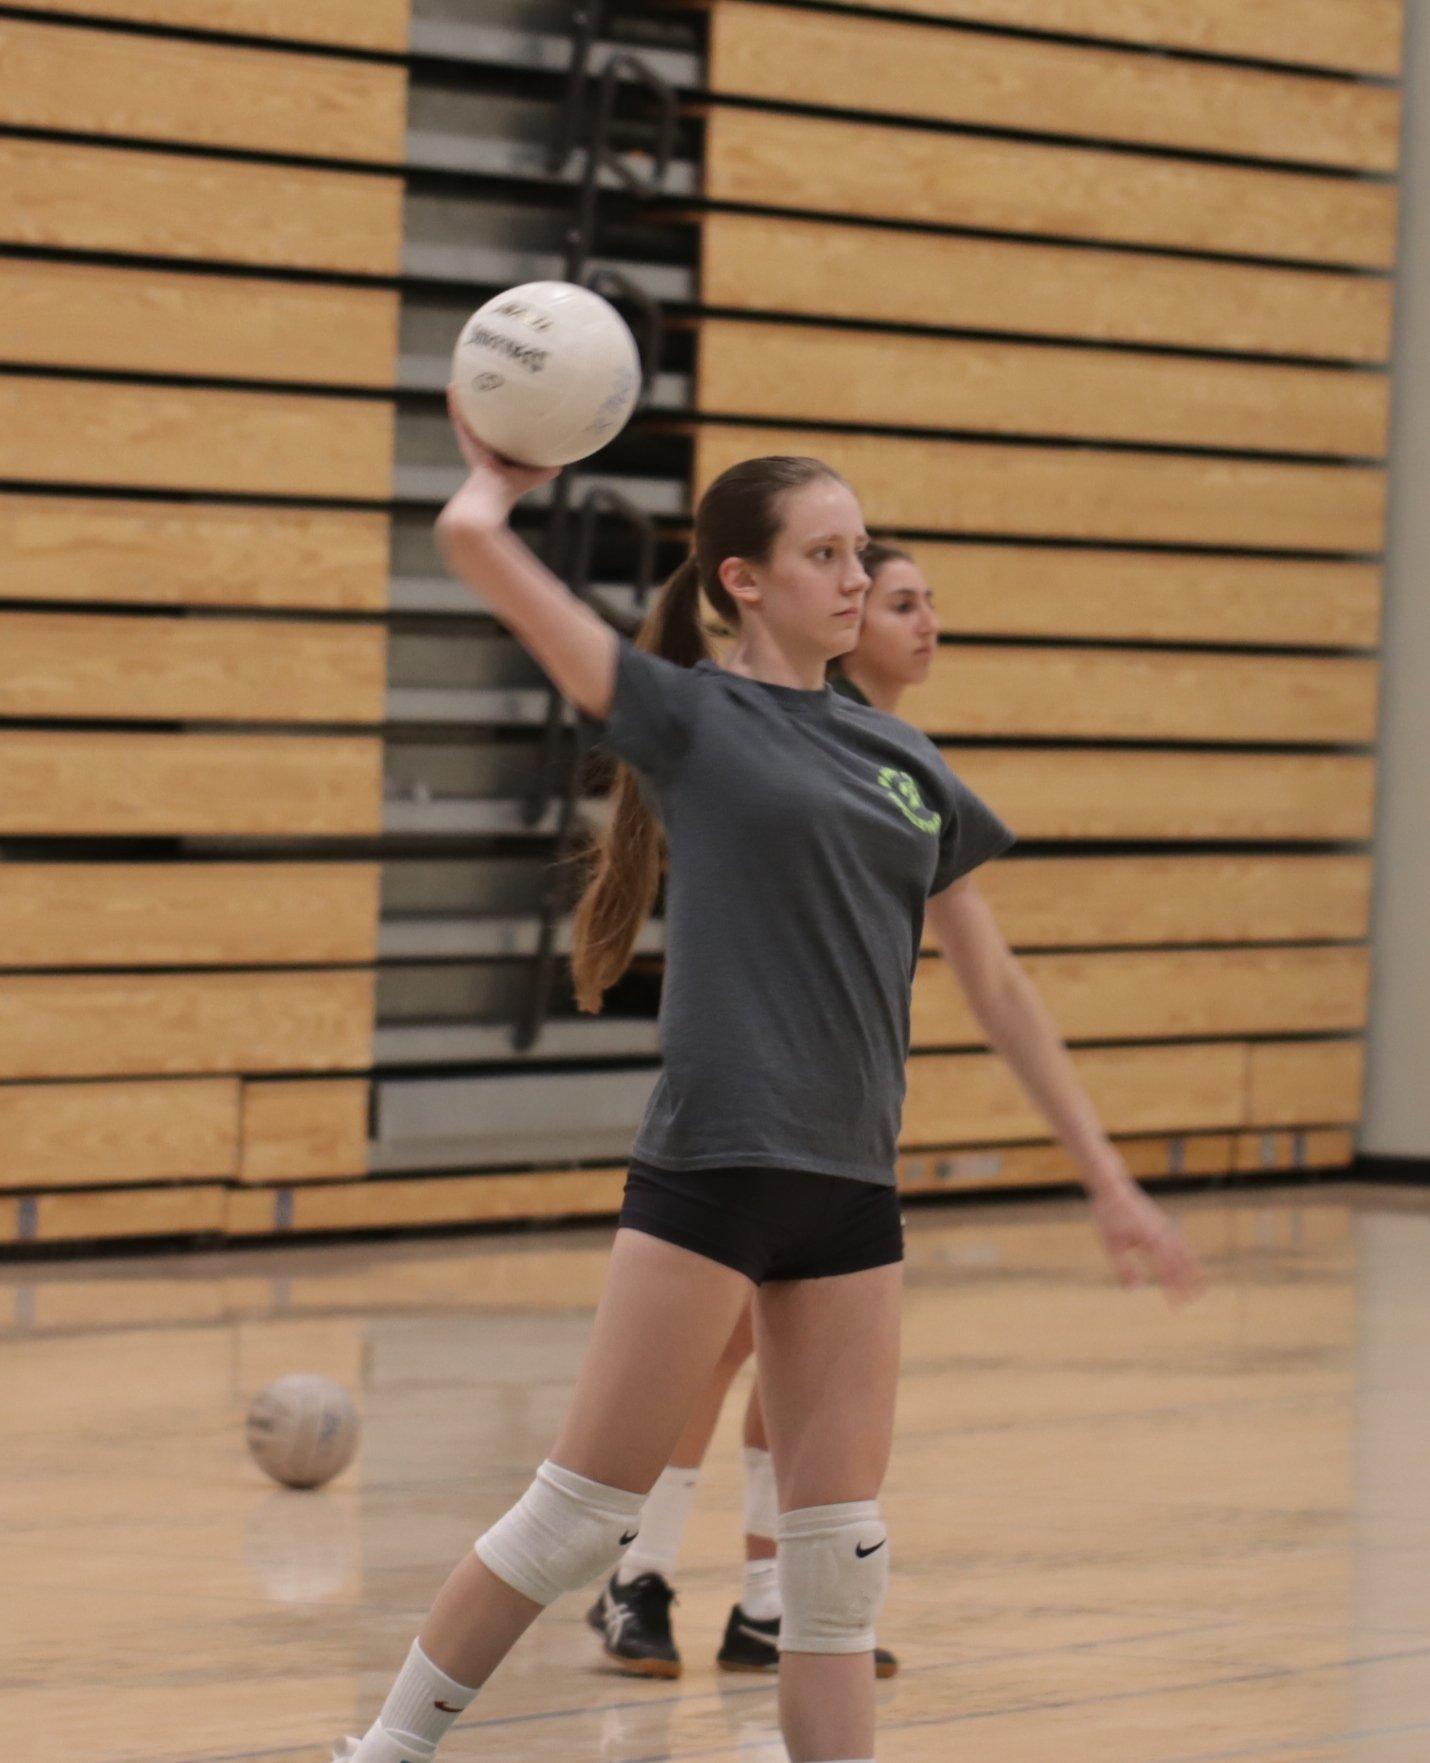 Girls volleyball seeks to compete in CCS The Campanile